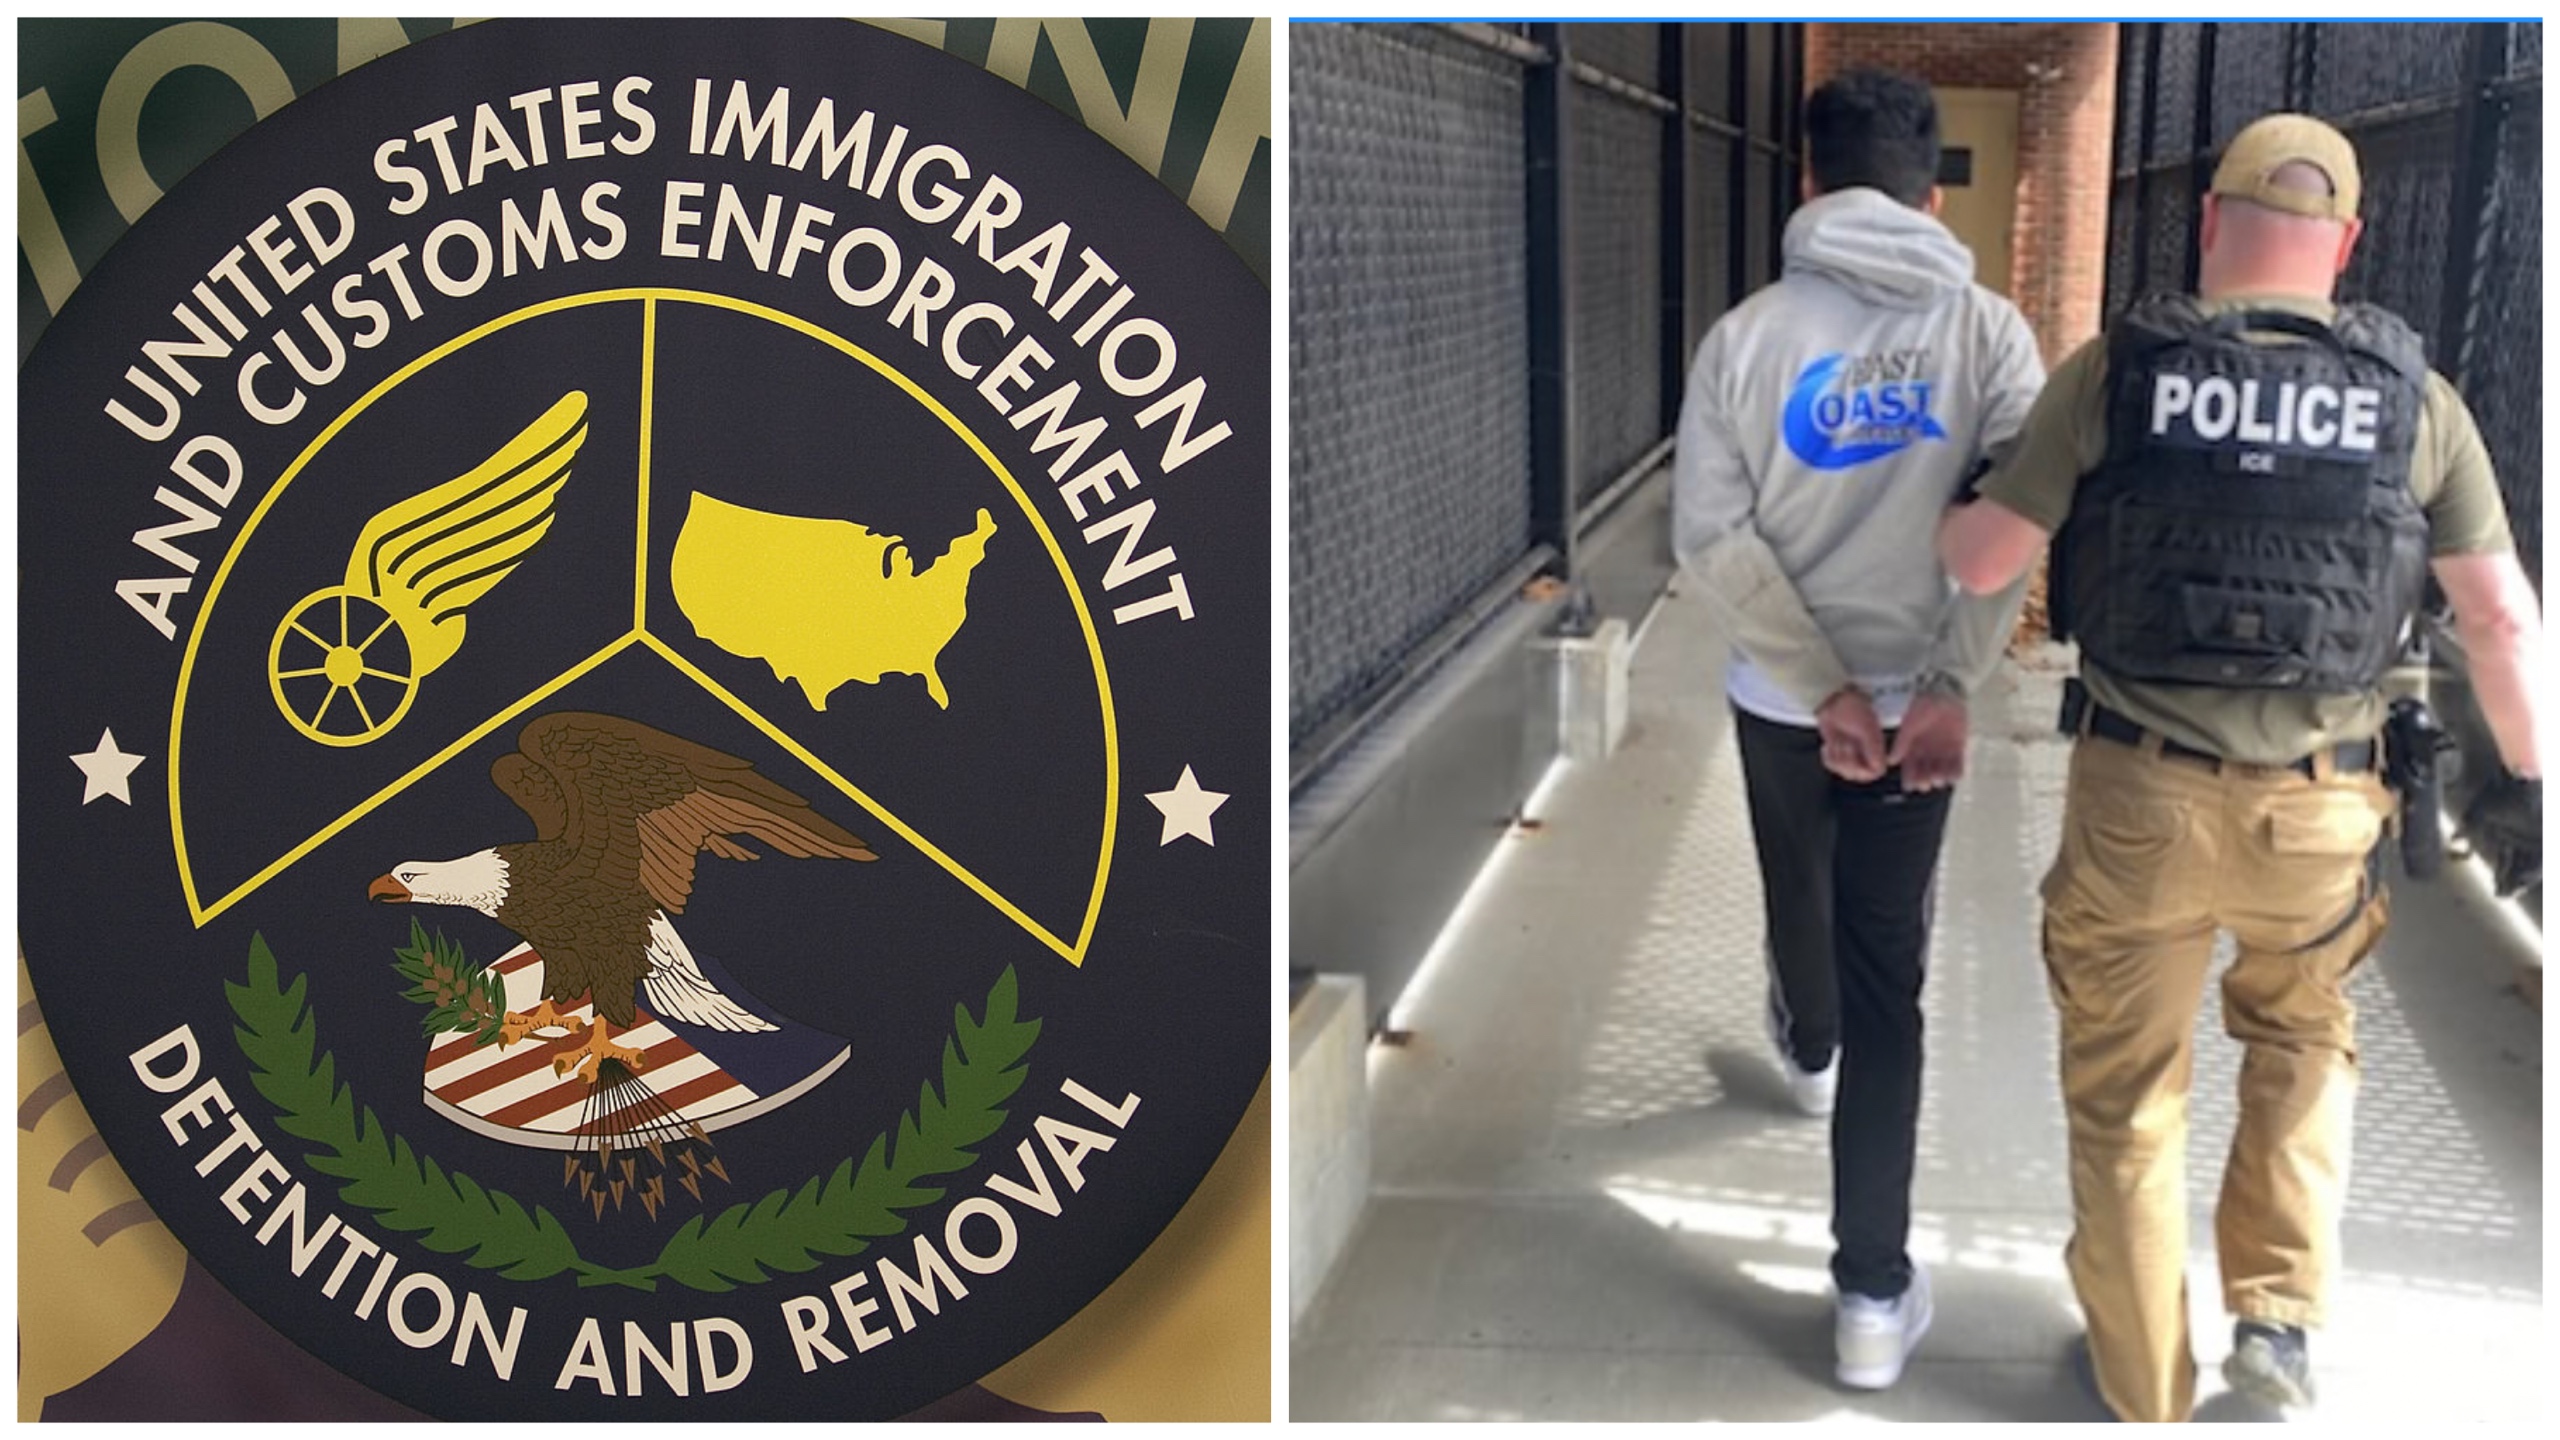 ICE Reacts to Release of Illegal Immigrant Suspected of Child Molestation by Sanctuary City